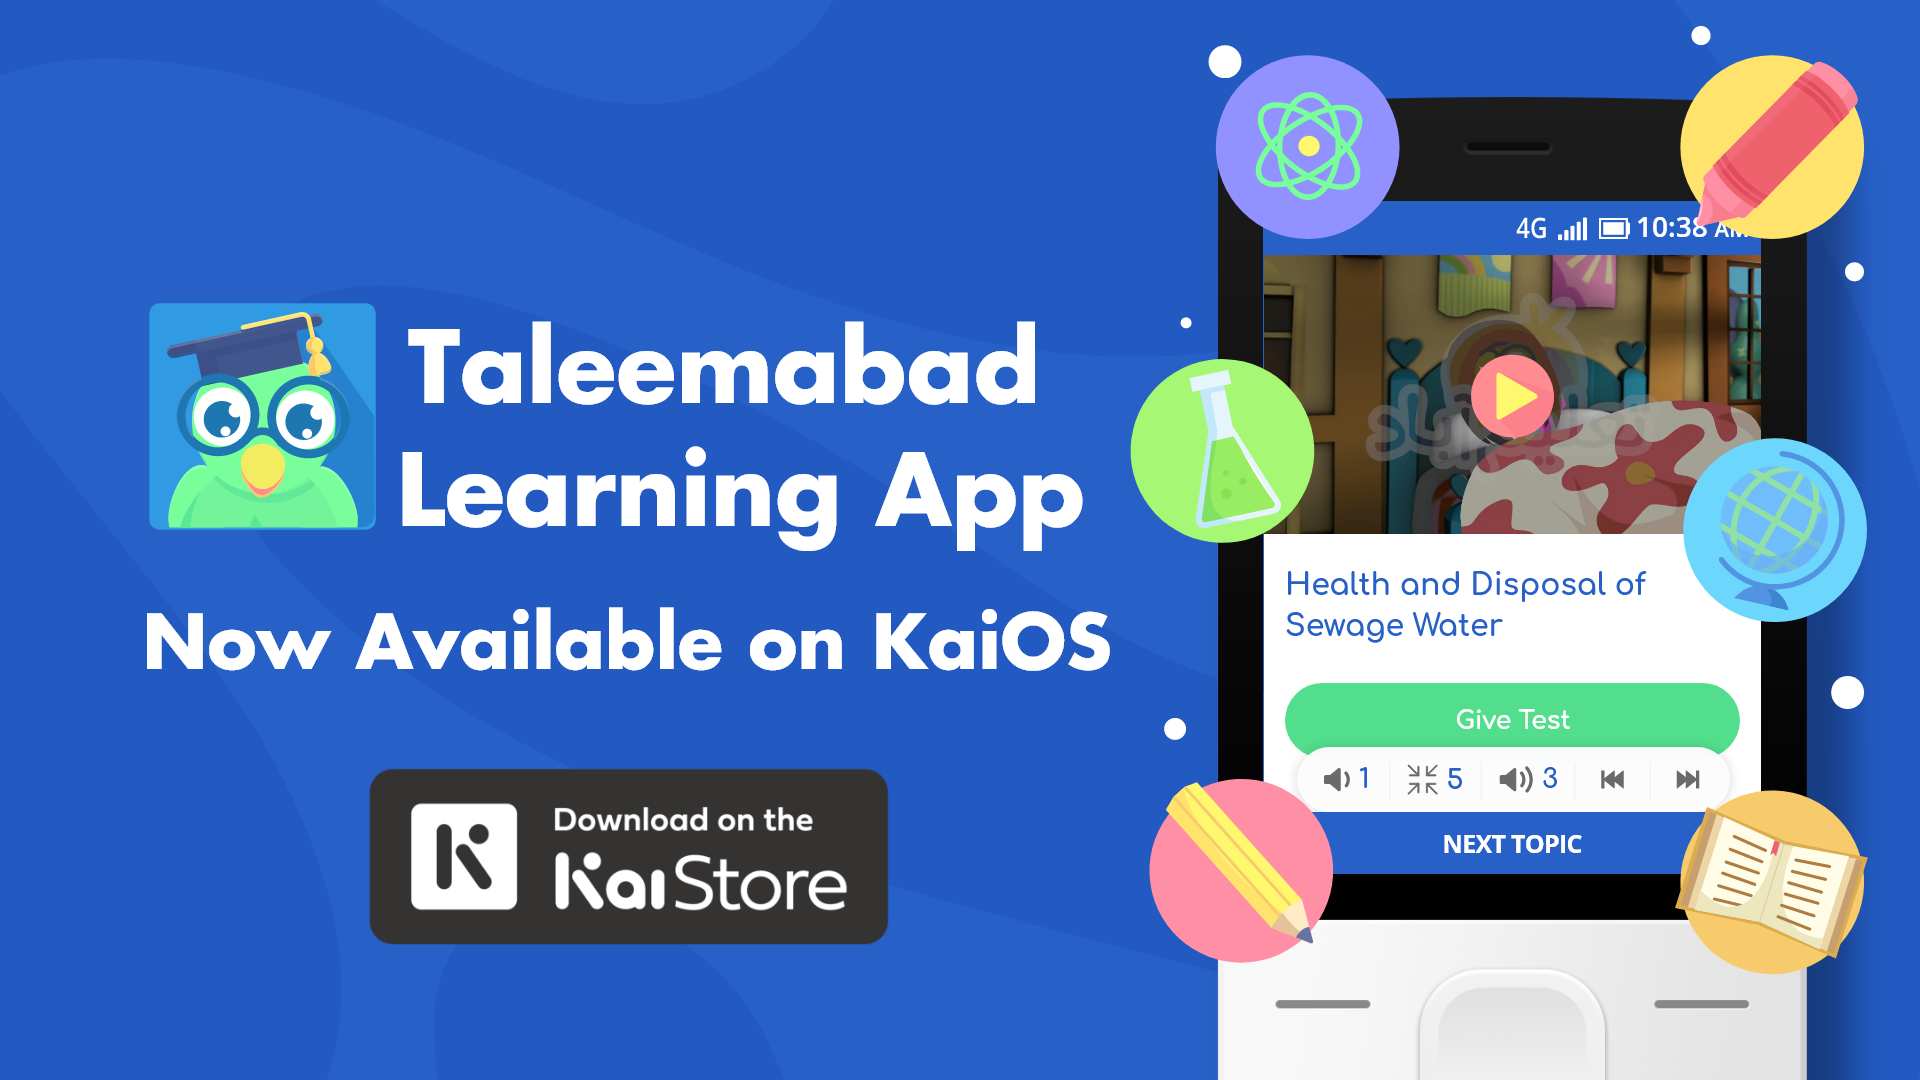 Taleemabad app now available on KaiOS